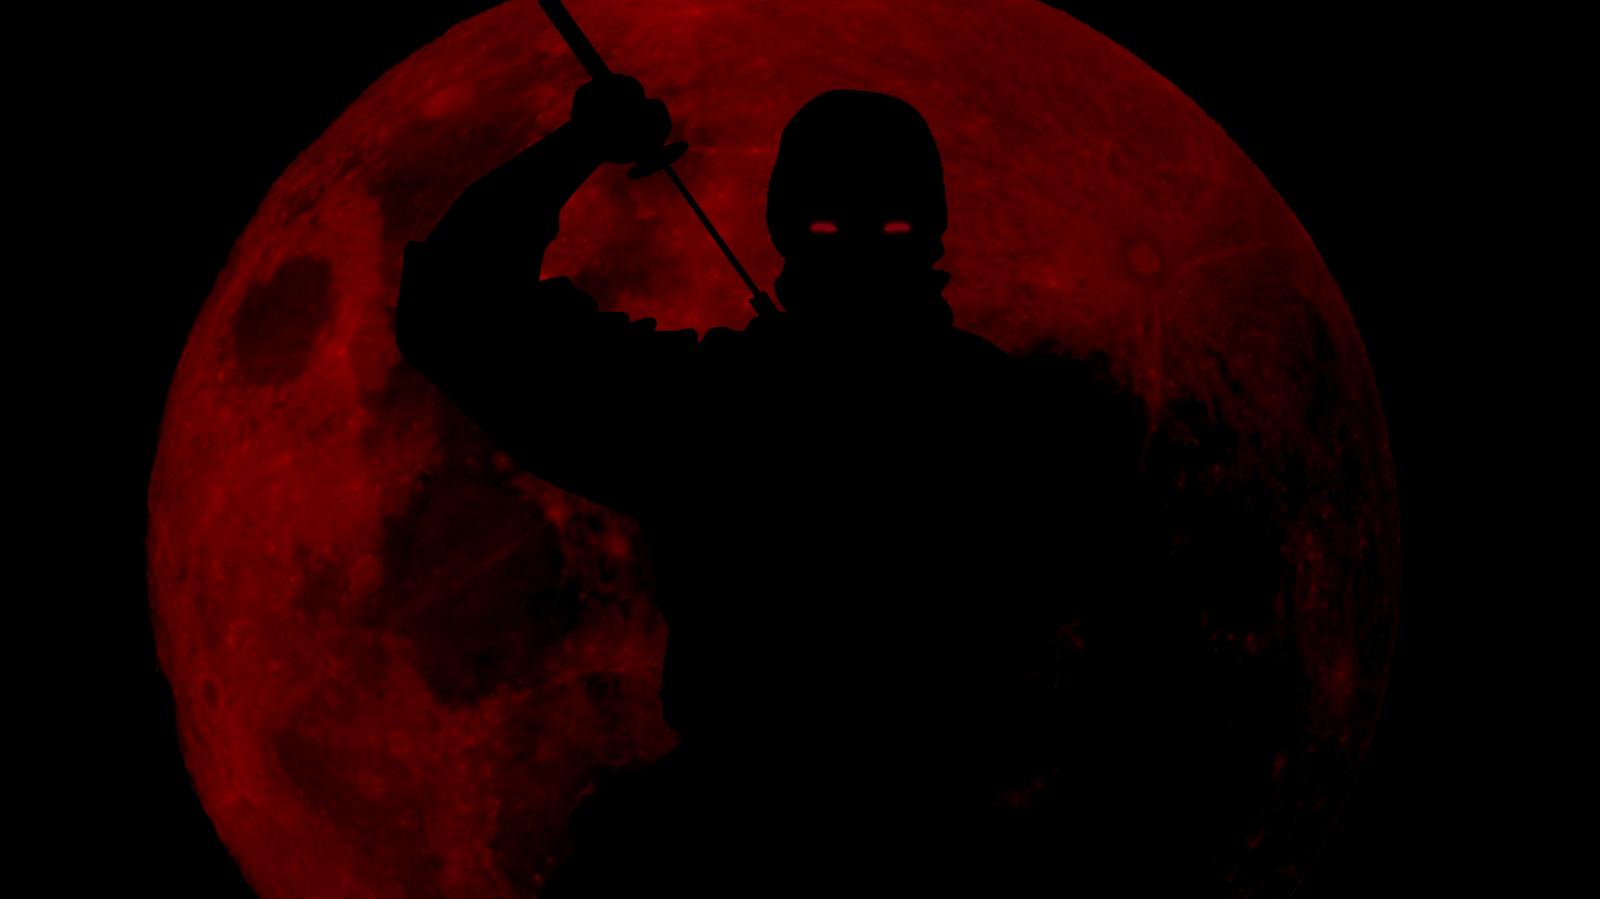 Ninja And Red Moon Wallpaper Pc For Your